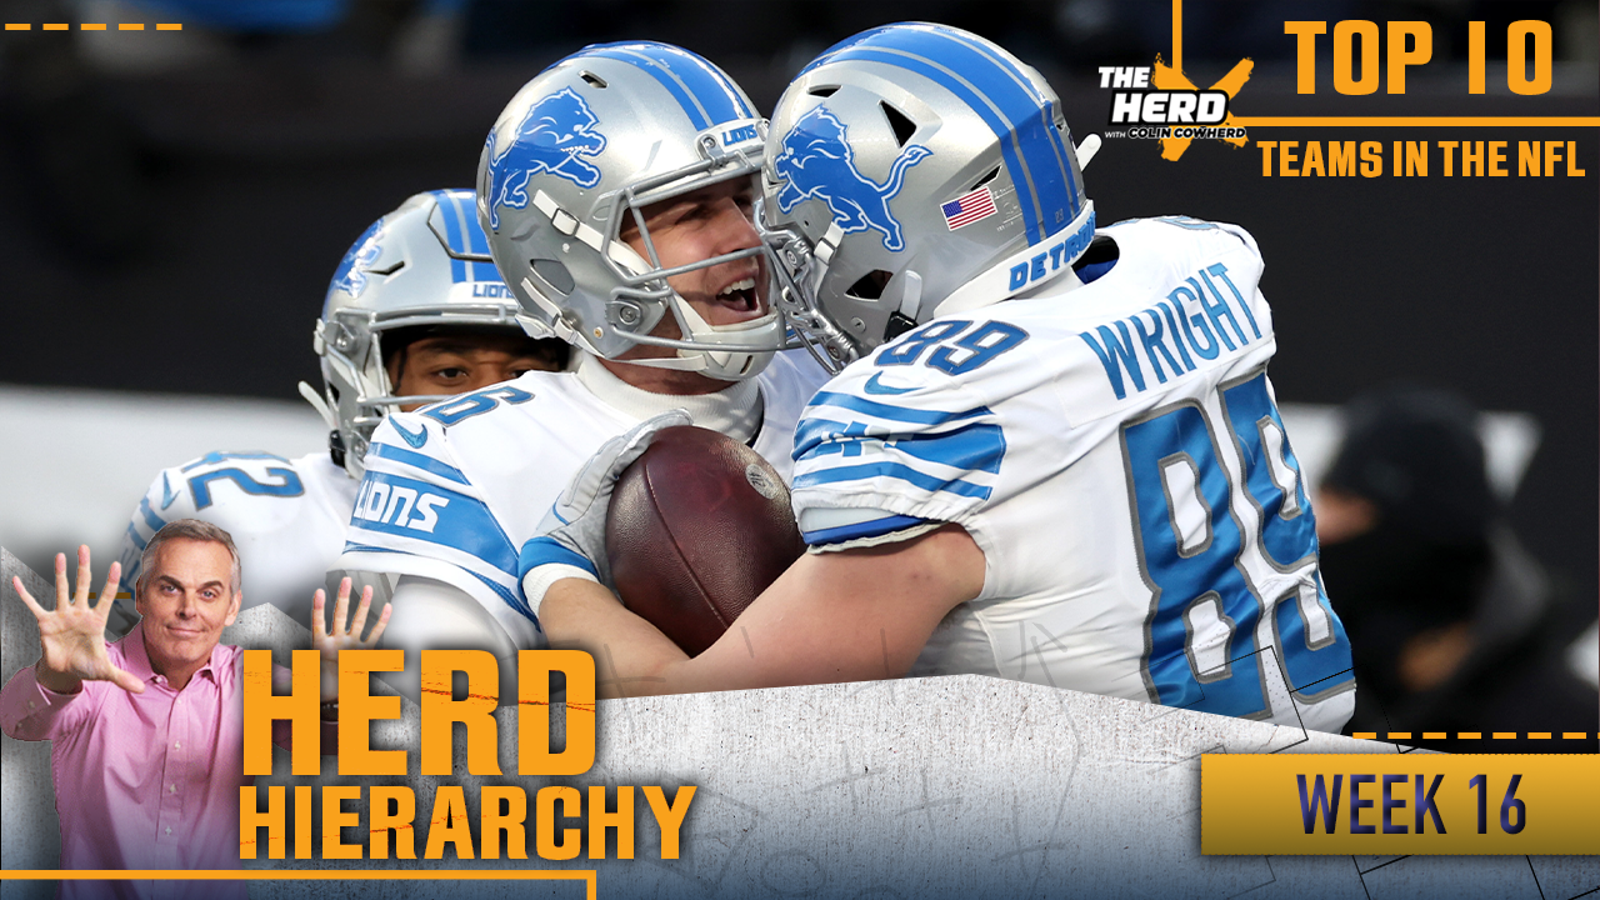 Herd Hierarchy: Lions leap in, Jaguars, Bengals pack Colin's Top 10 into Week 16